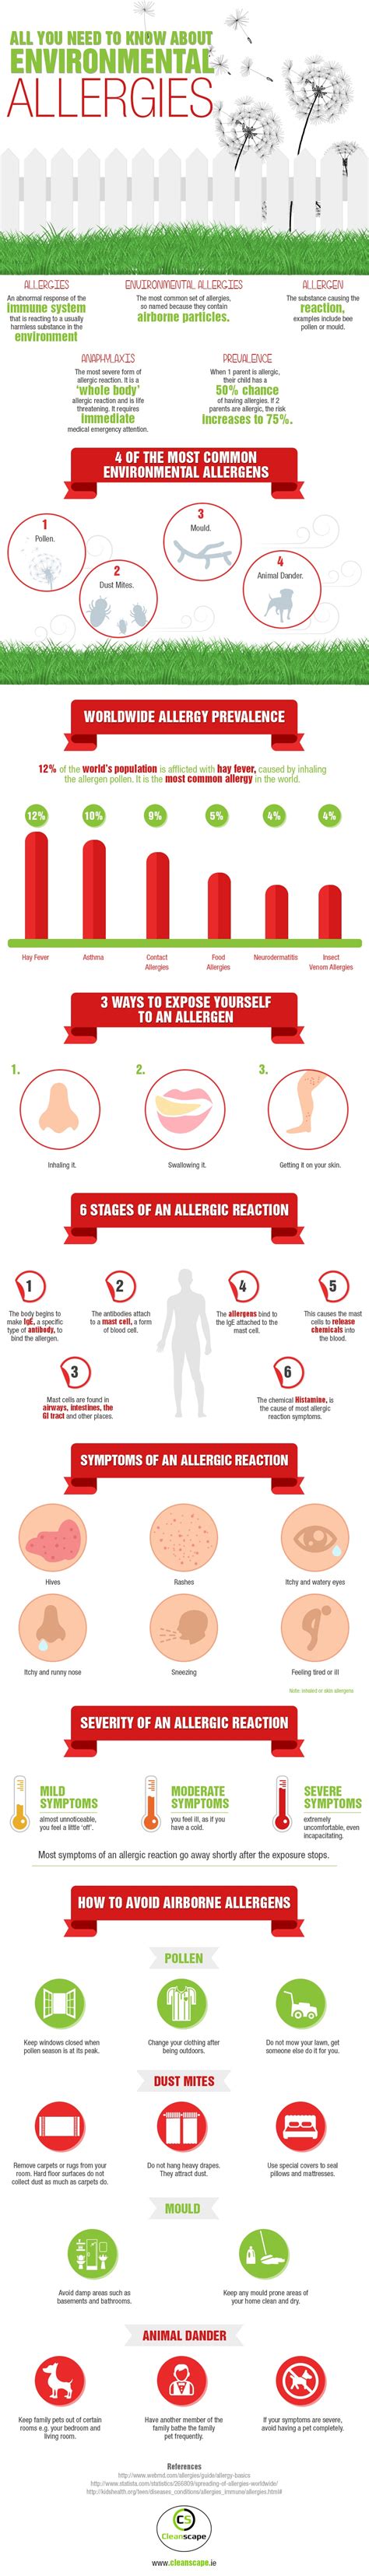 Infographic All You Need To Know About Environmental Allergies